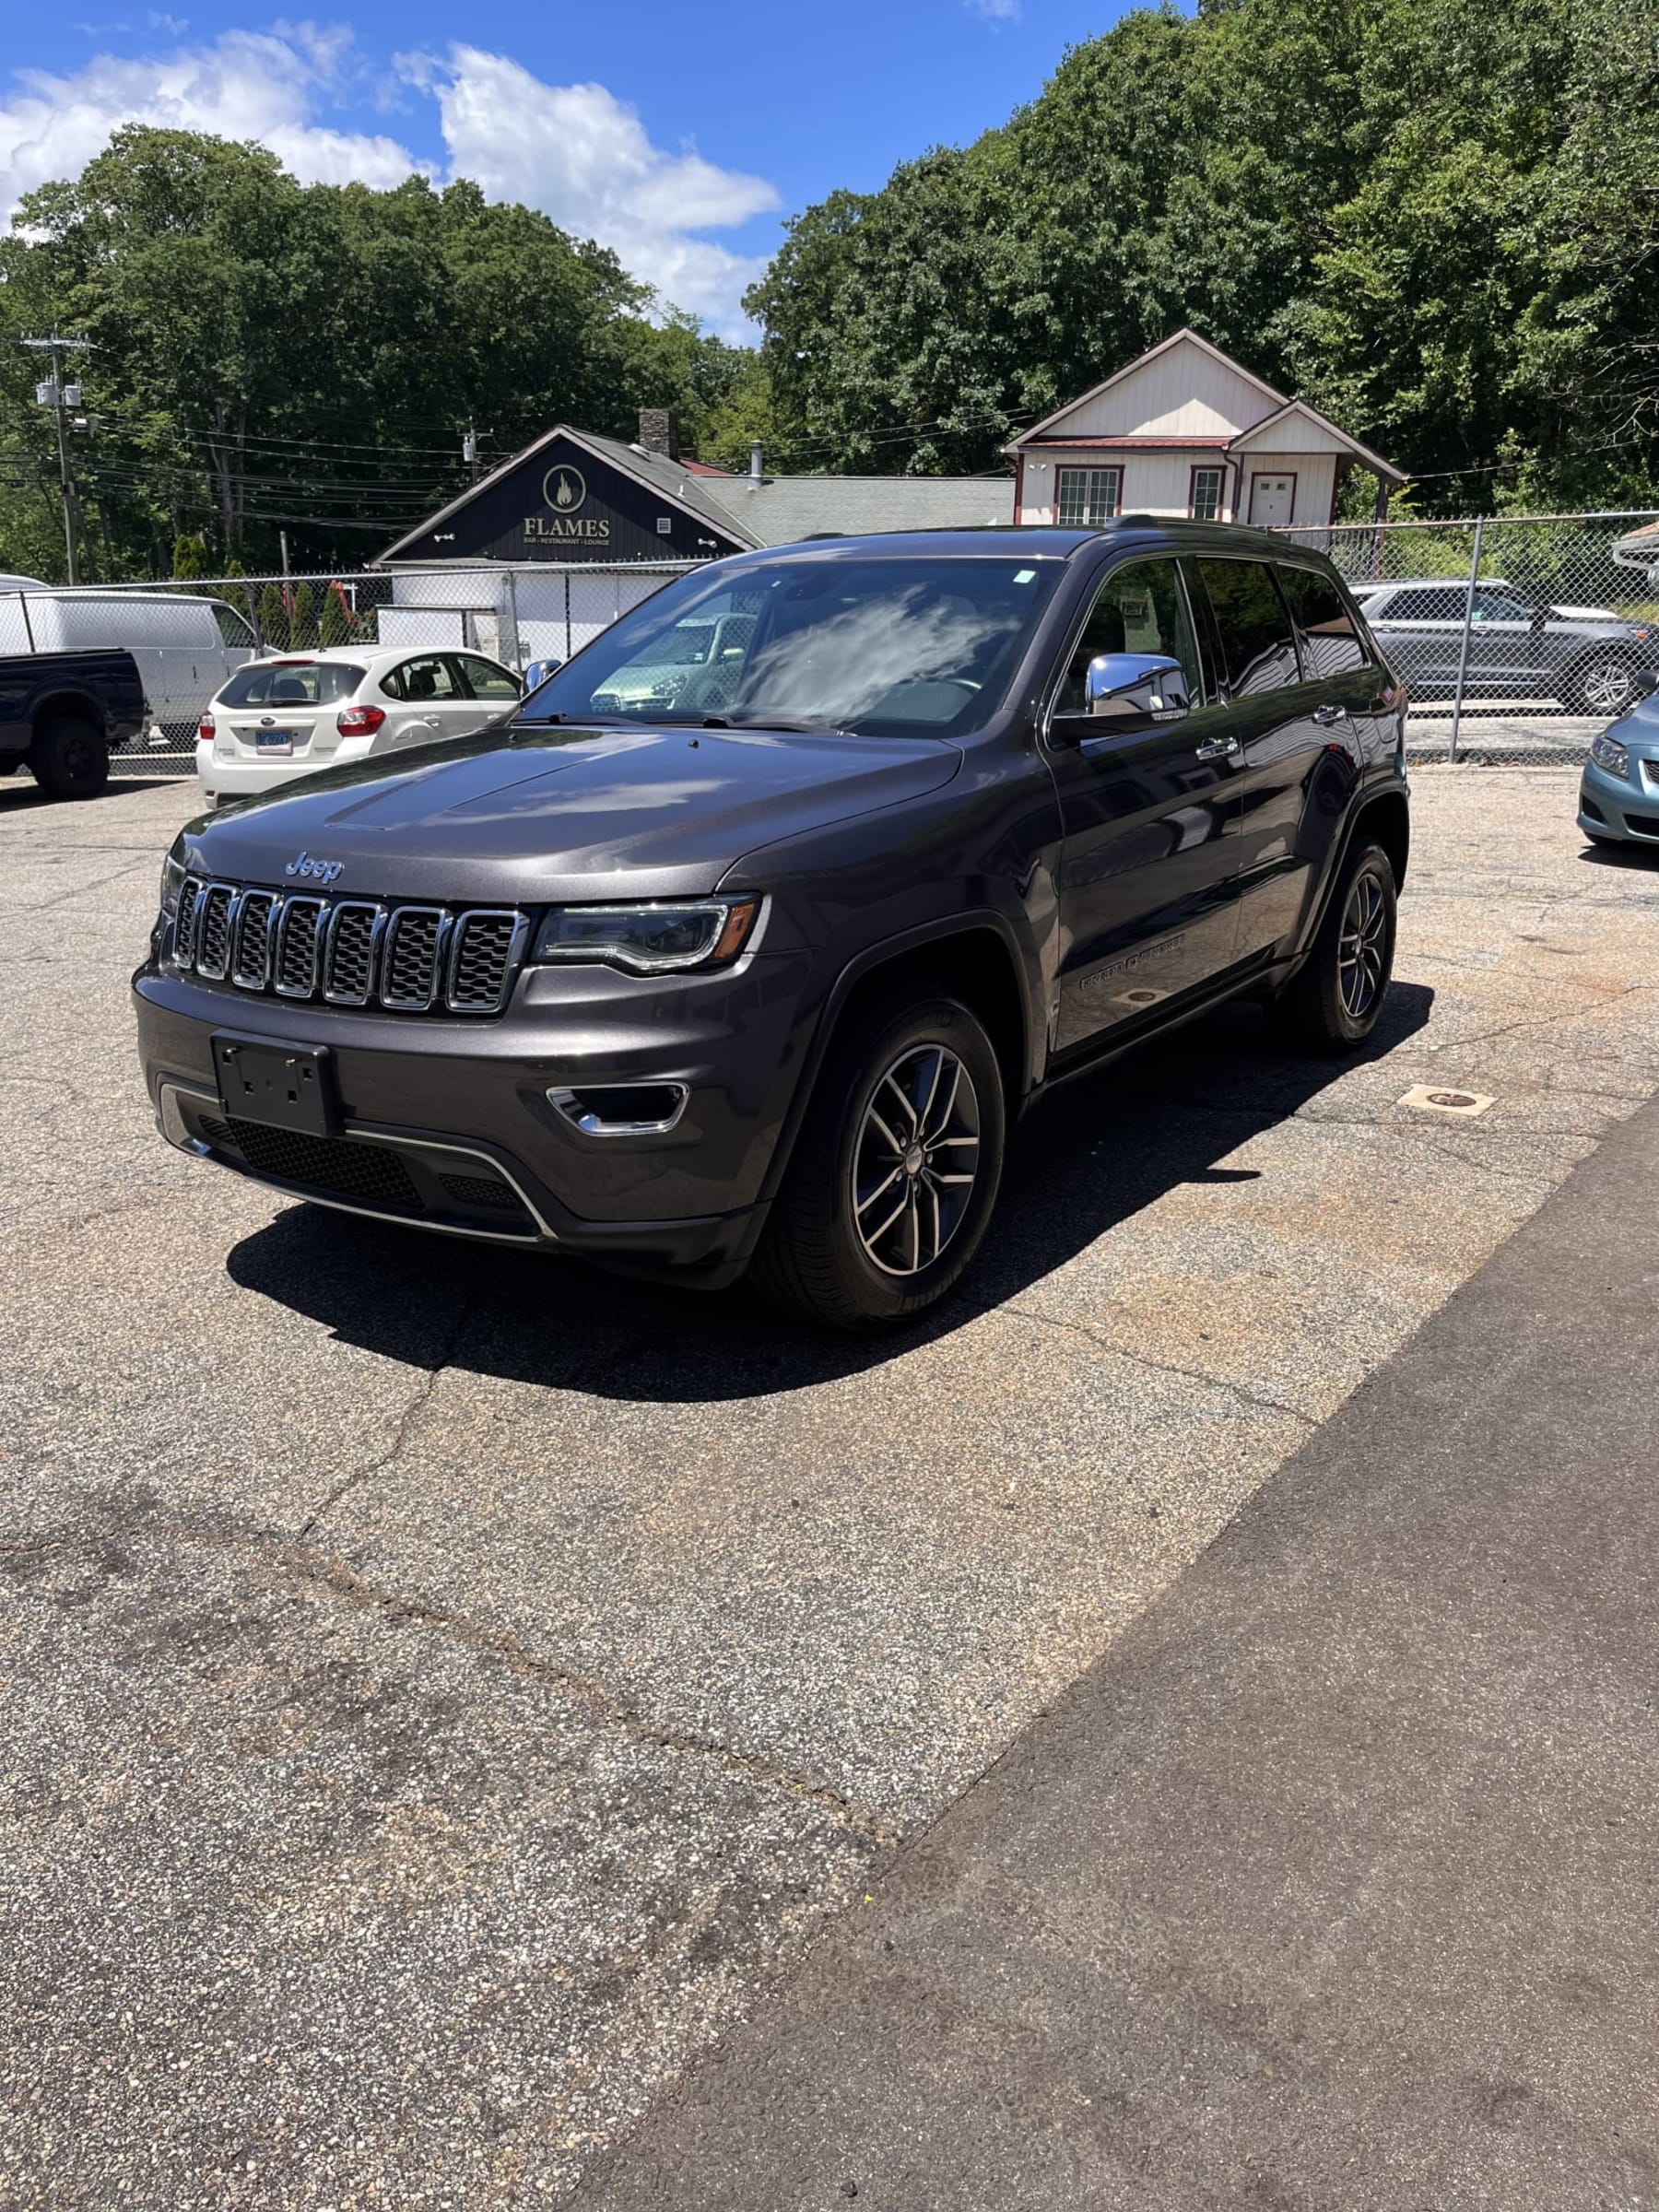 NEW ARRIVAL!! 2017 Jeep Grand Cherokee Limited!! Luxury II group! Loaded with navigation, panoramic roof, heated and cooled leather seats, heated rear seats , remote start, Bluetooth, backup camera and much much more!! Comes with a one year unlimited mileage warranty!! ONKY 84k miles!! Clean carfax!! Definitely won’t last at only $18,900!!